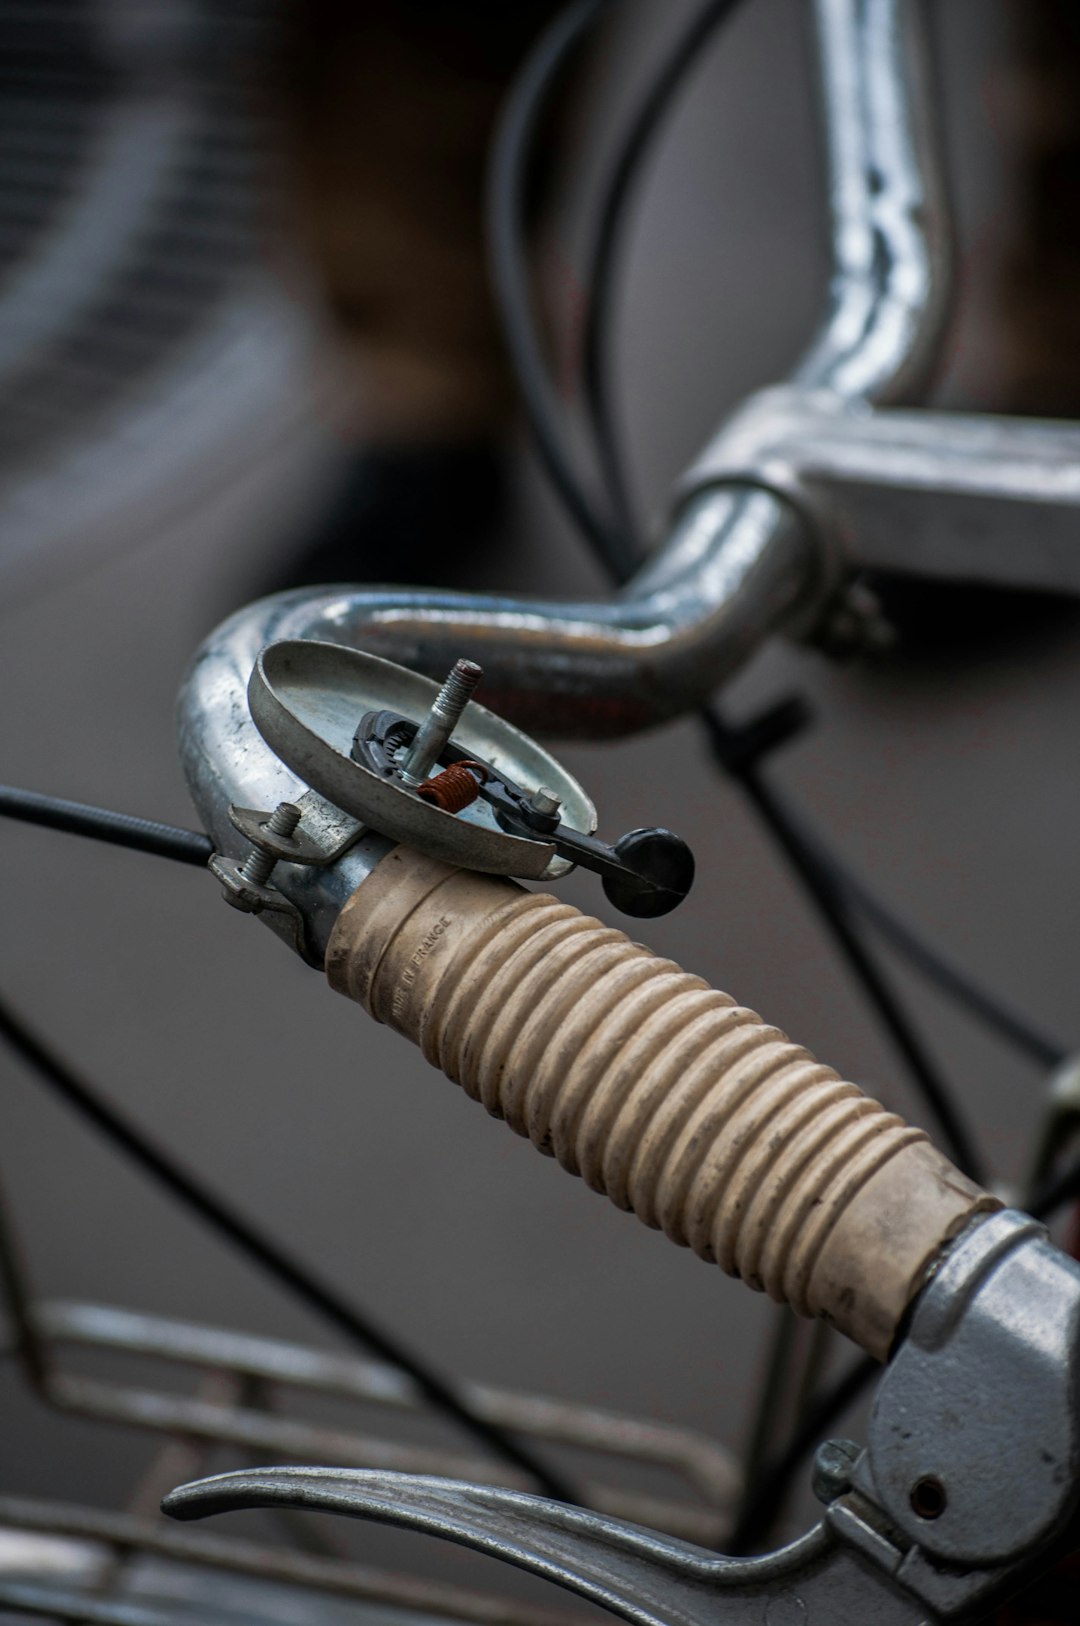 grey bicycle wheel in close up photography